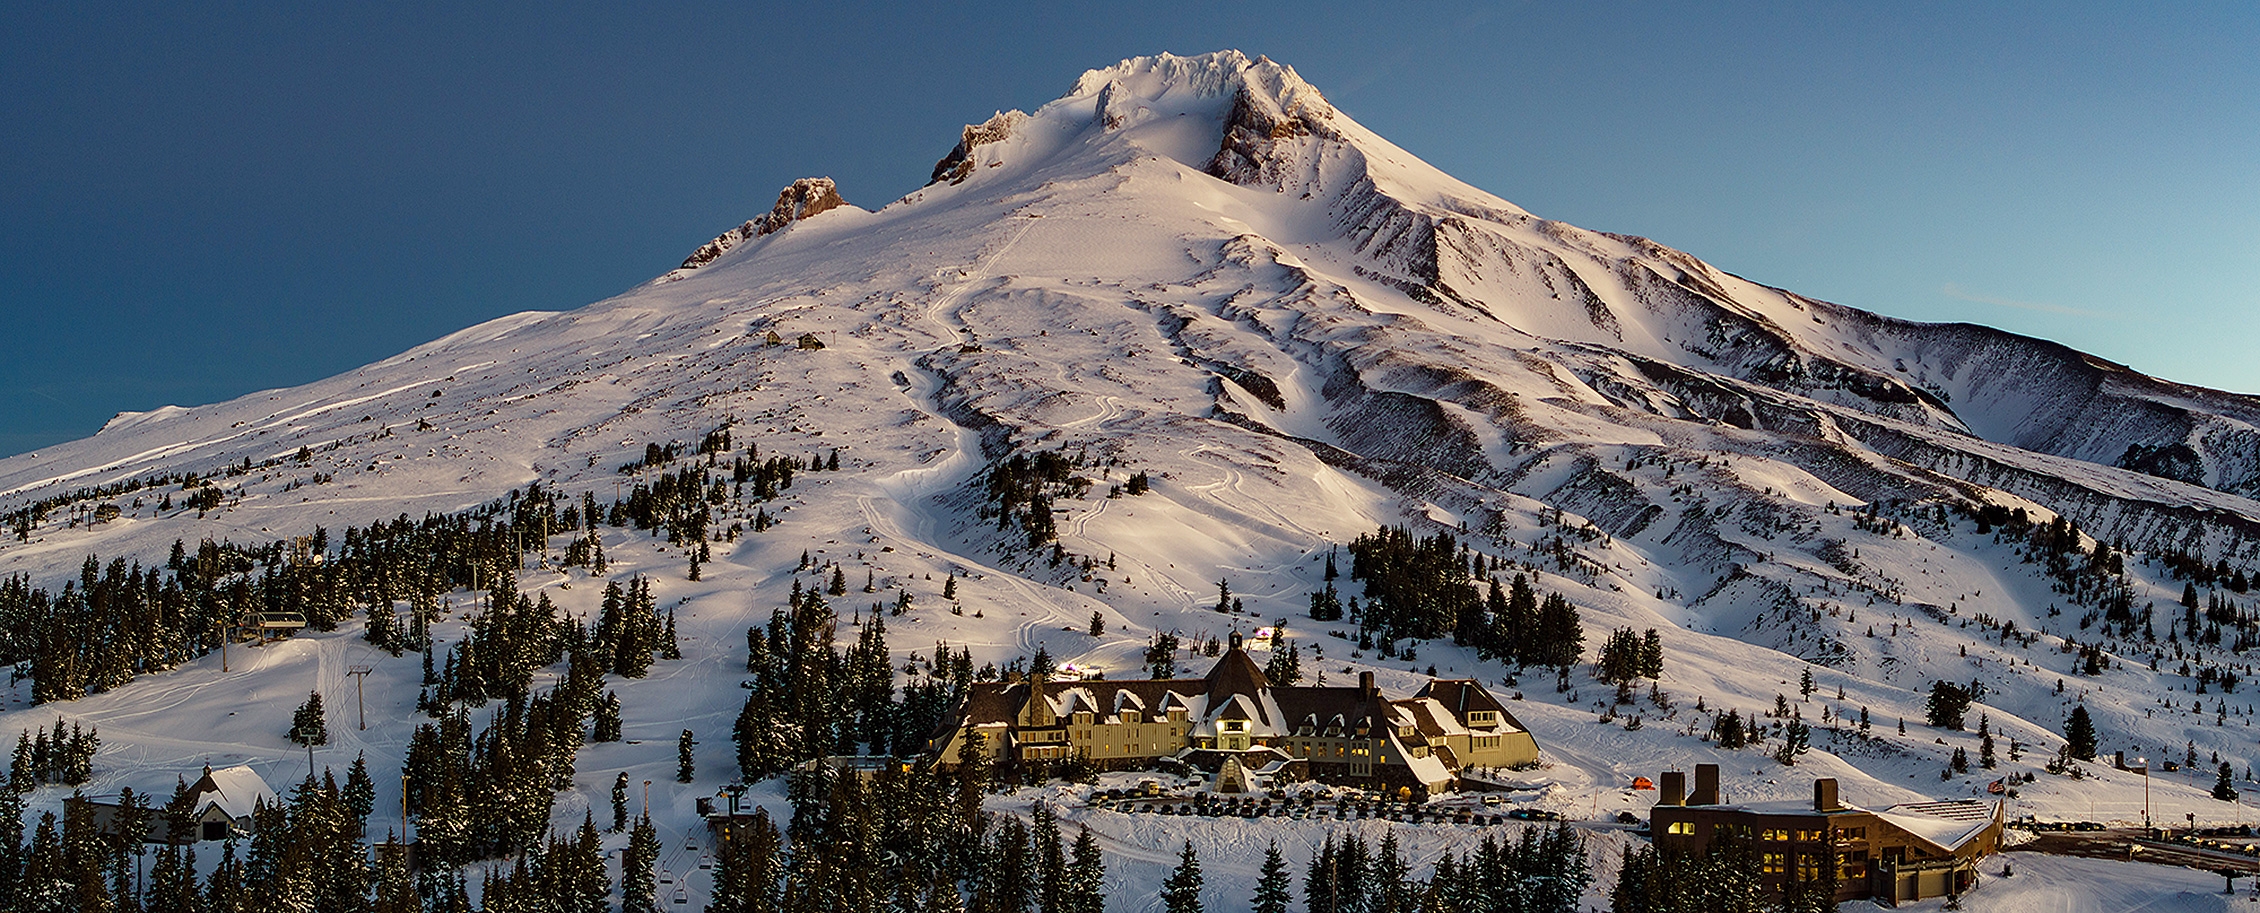 DRONE PHOTO OF TIMBERLINE LODGE ON MT. HOOD AT TWILIGHT IN THE WINTER